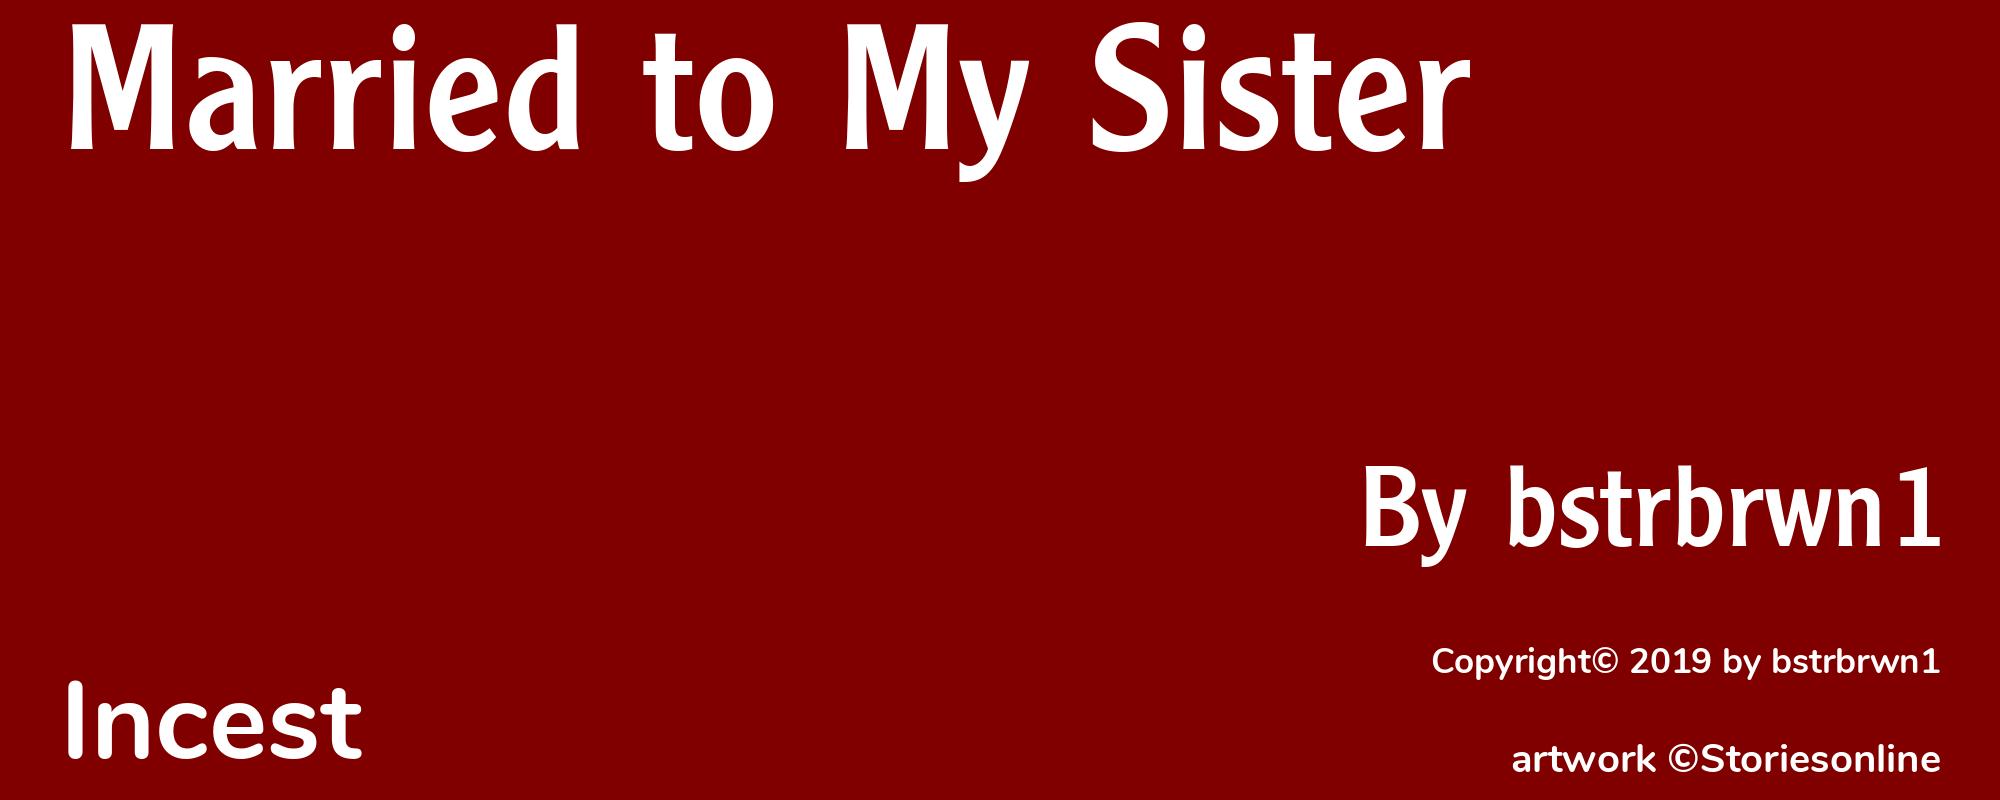 Married to My Sister - Cover